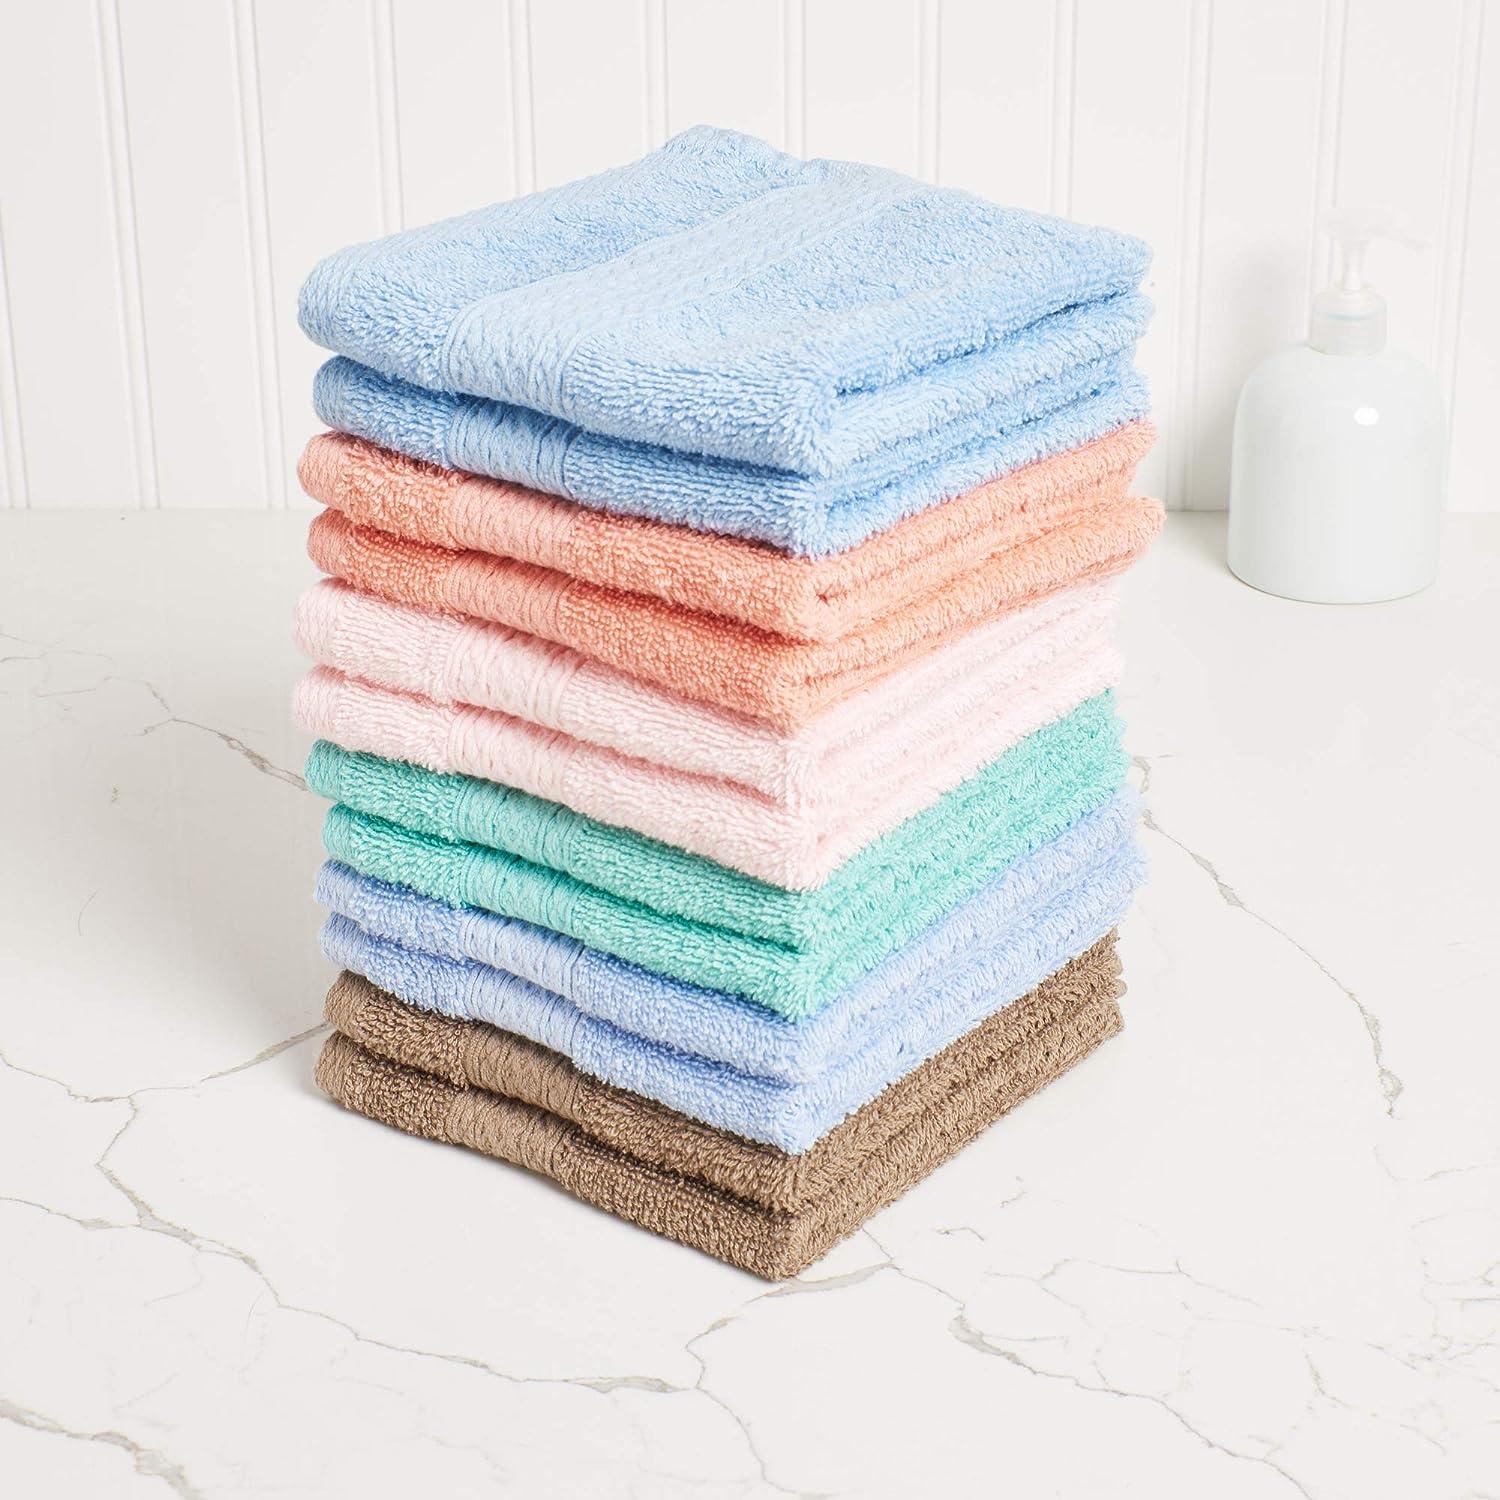 Custom Imprinted High Quality Customizable Cotton Washcloths/Face Cloths  Towels 